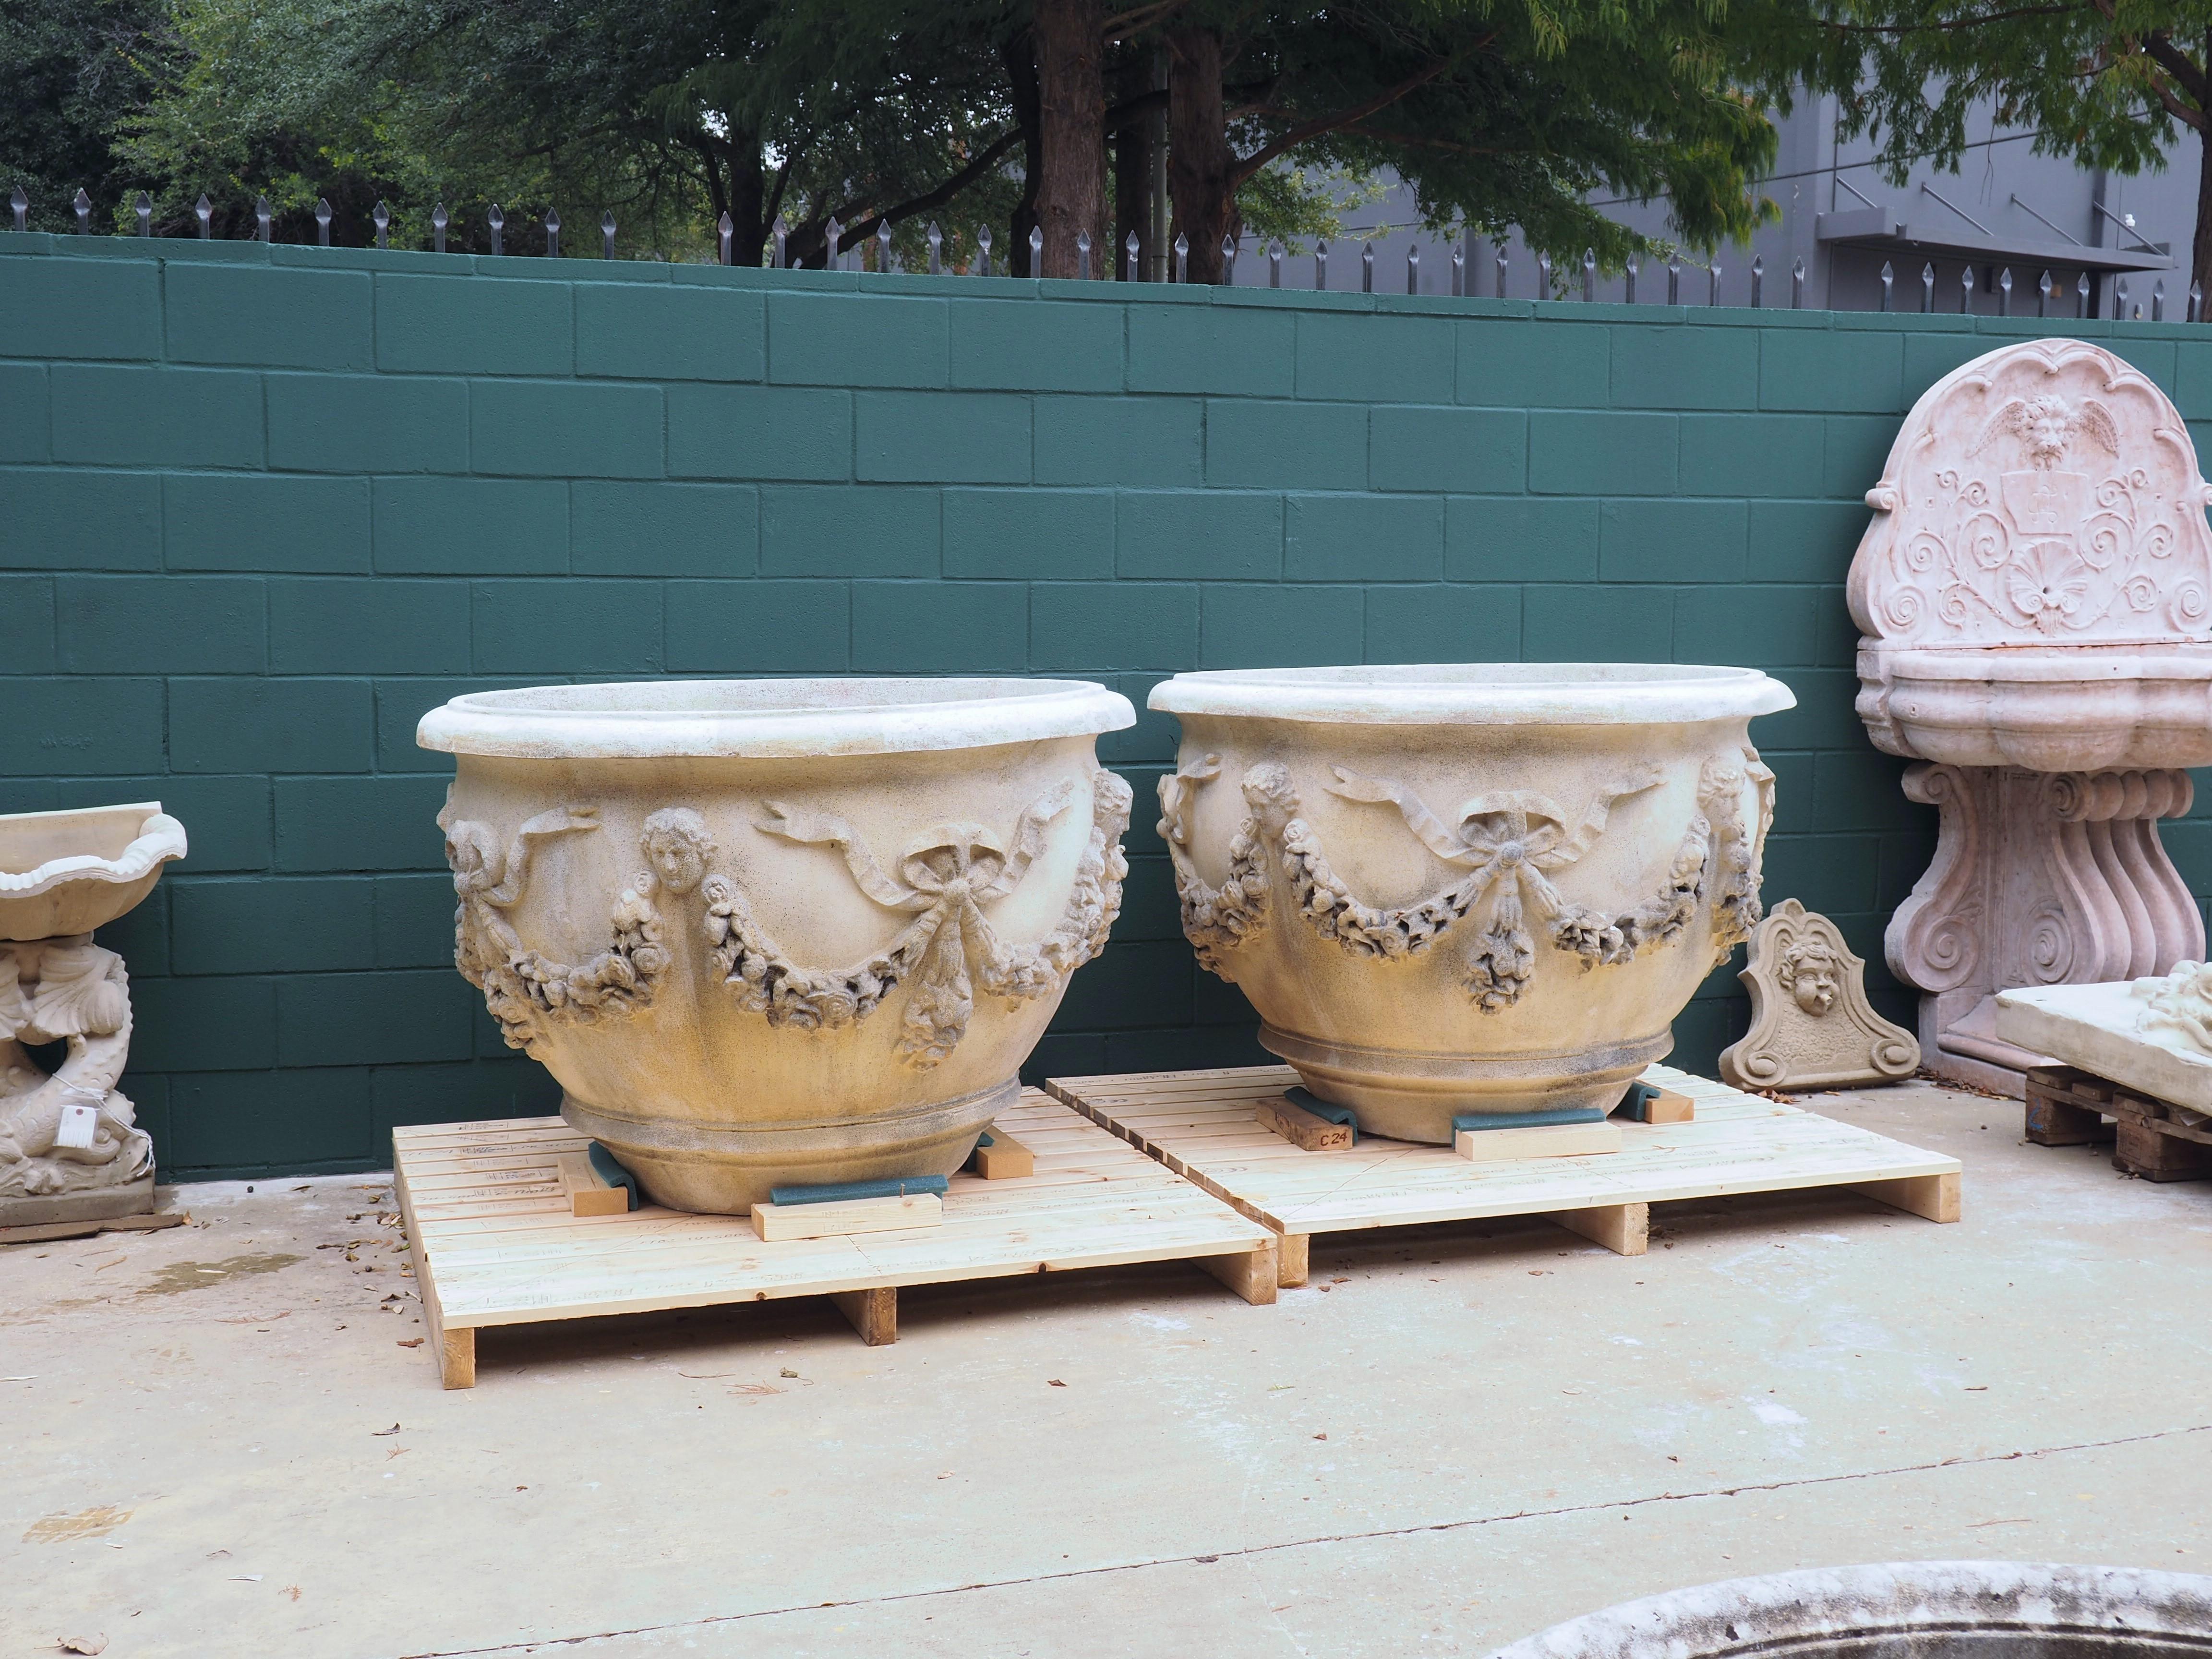 With a max diameter of over 52 inches, this pair of French cast stone planters are large enough to accommodate anything from multiple plants up to single trees. The lip surrounding the opening has a thick and recessed quarter round molding, which